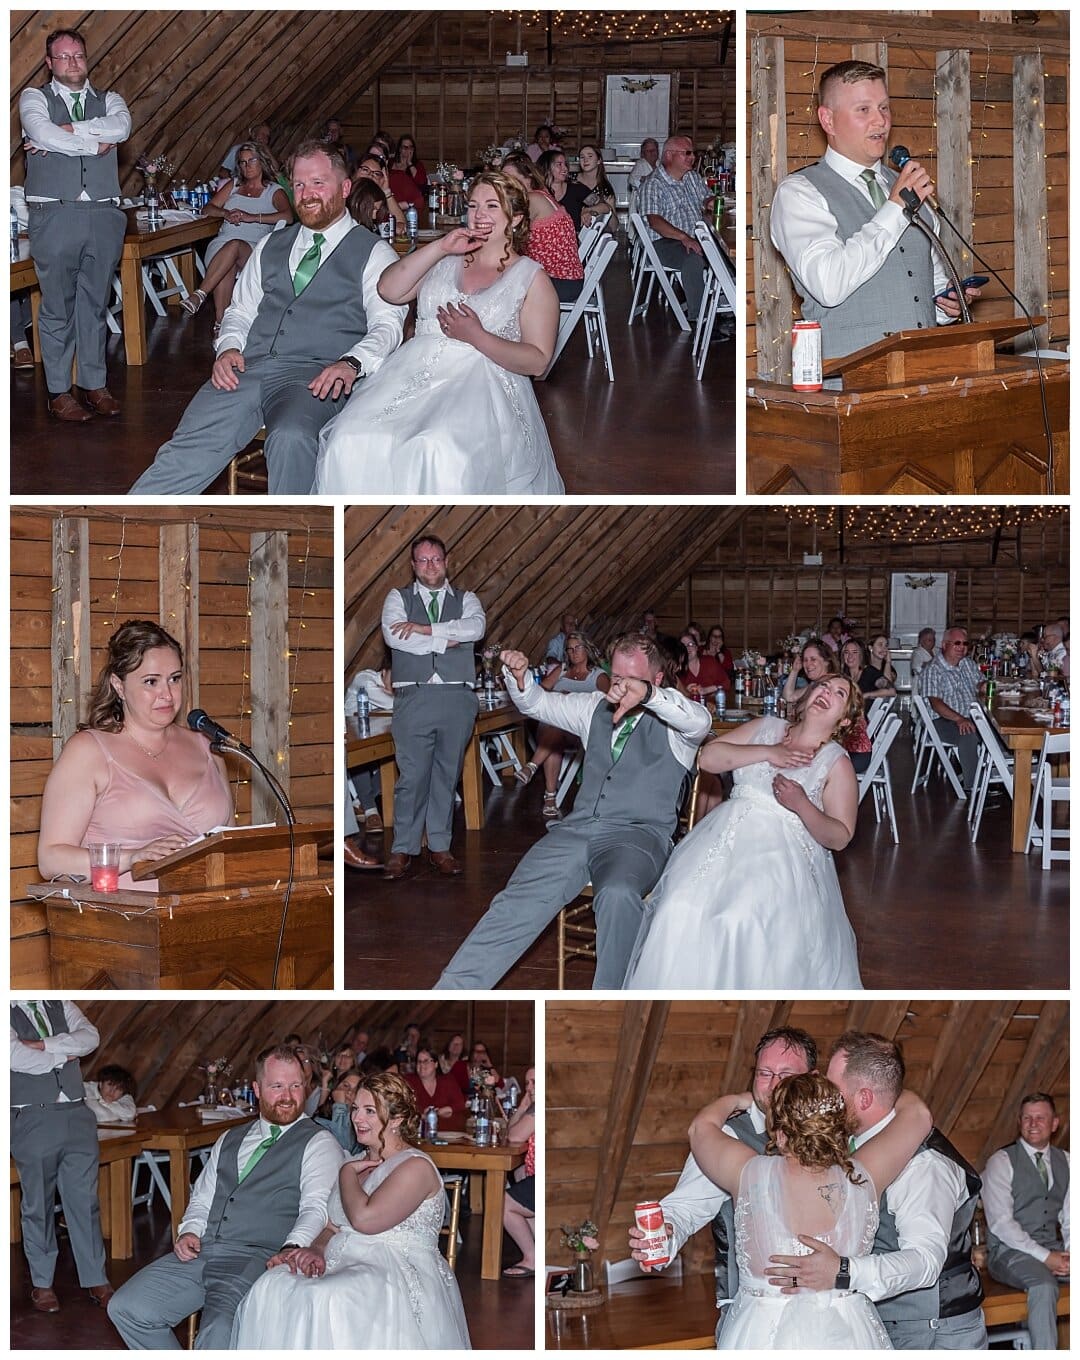 The bride and groom laugh while their guests give wedding speeches at Healy Farm in NS.